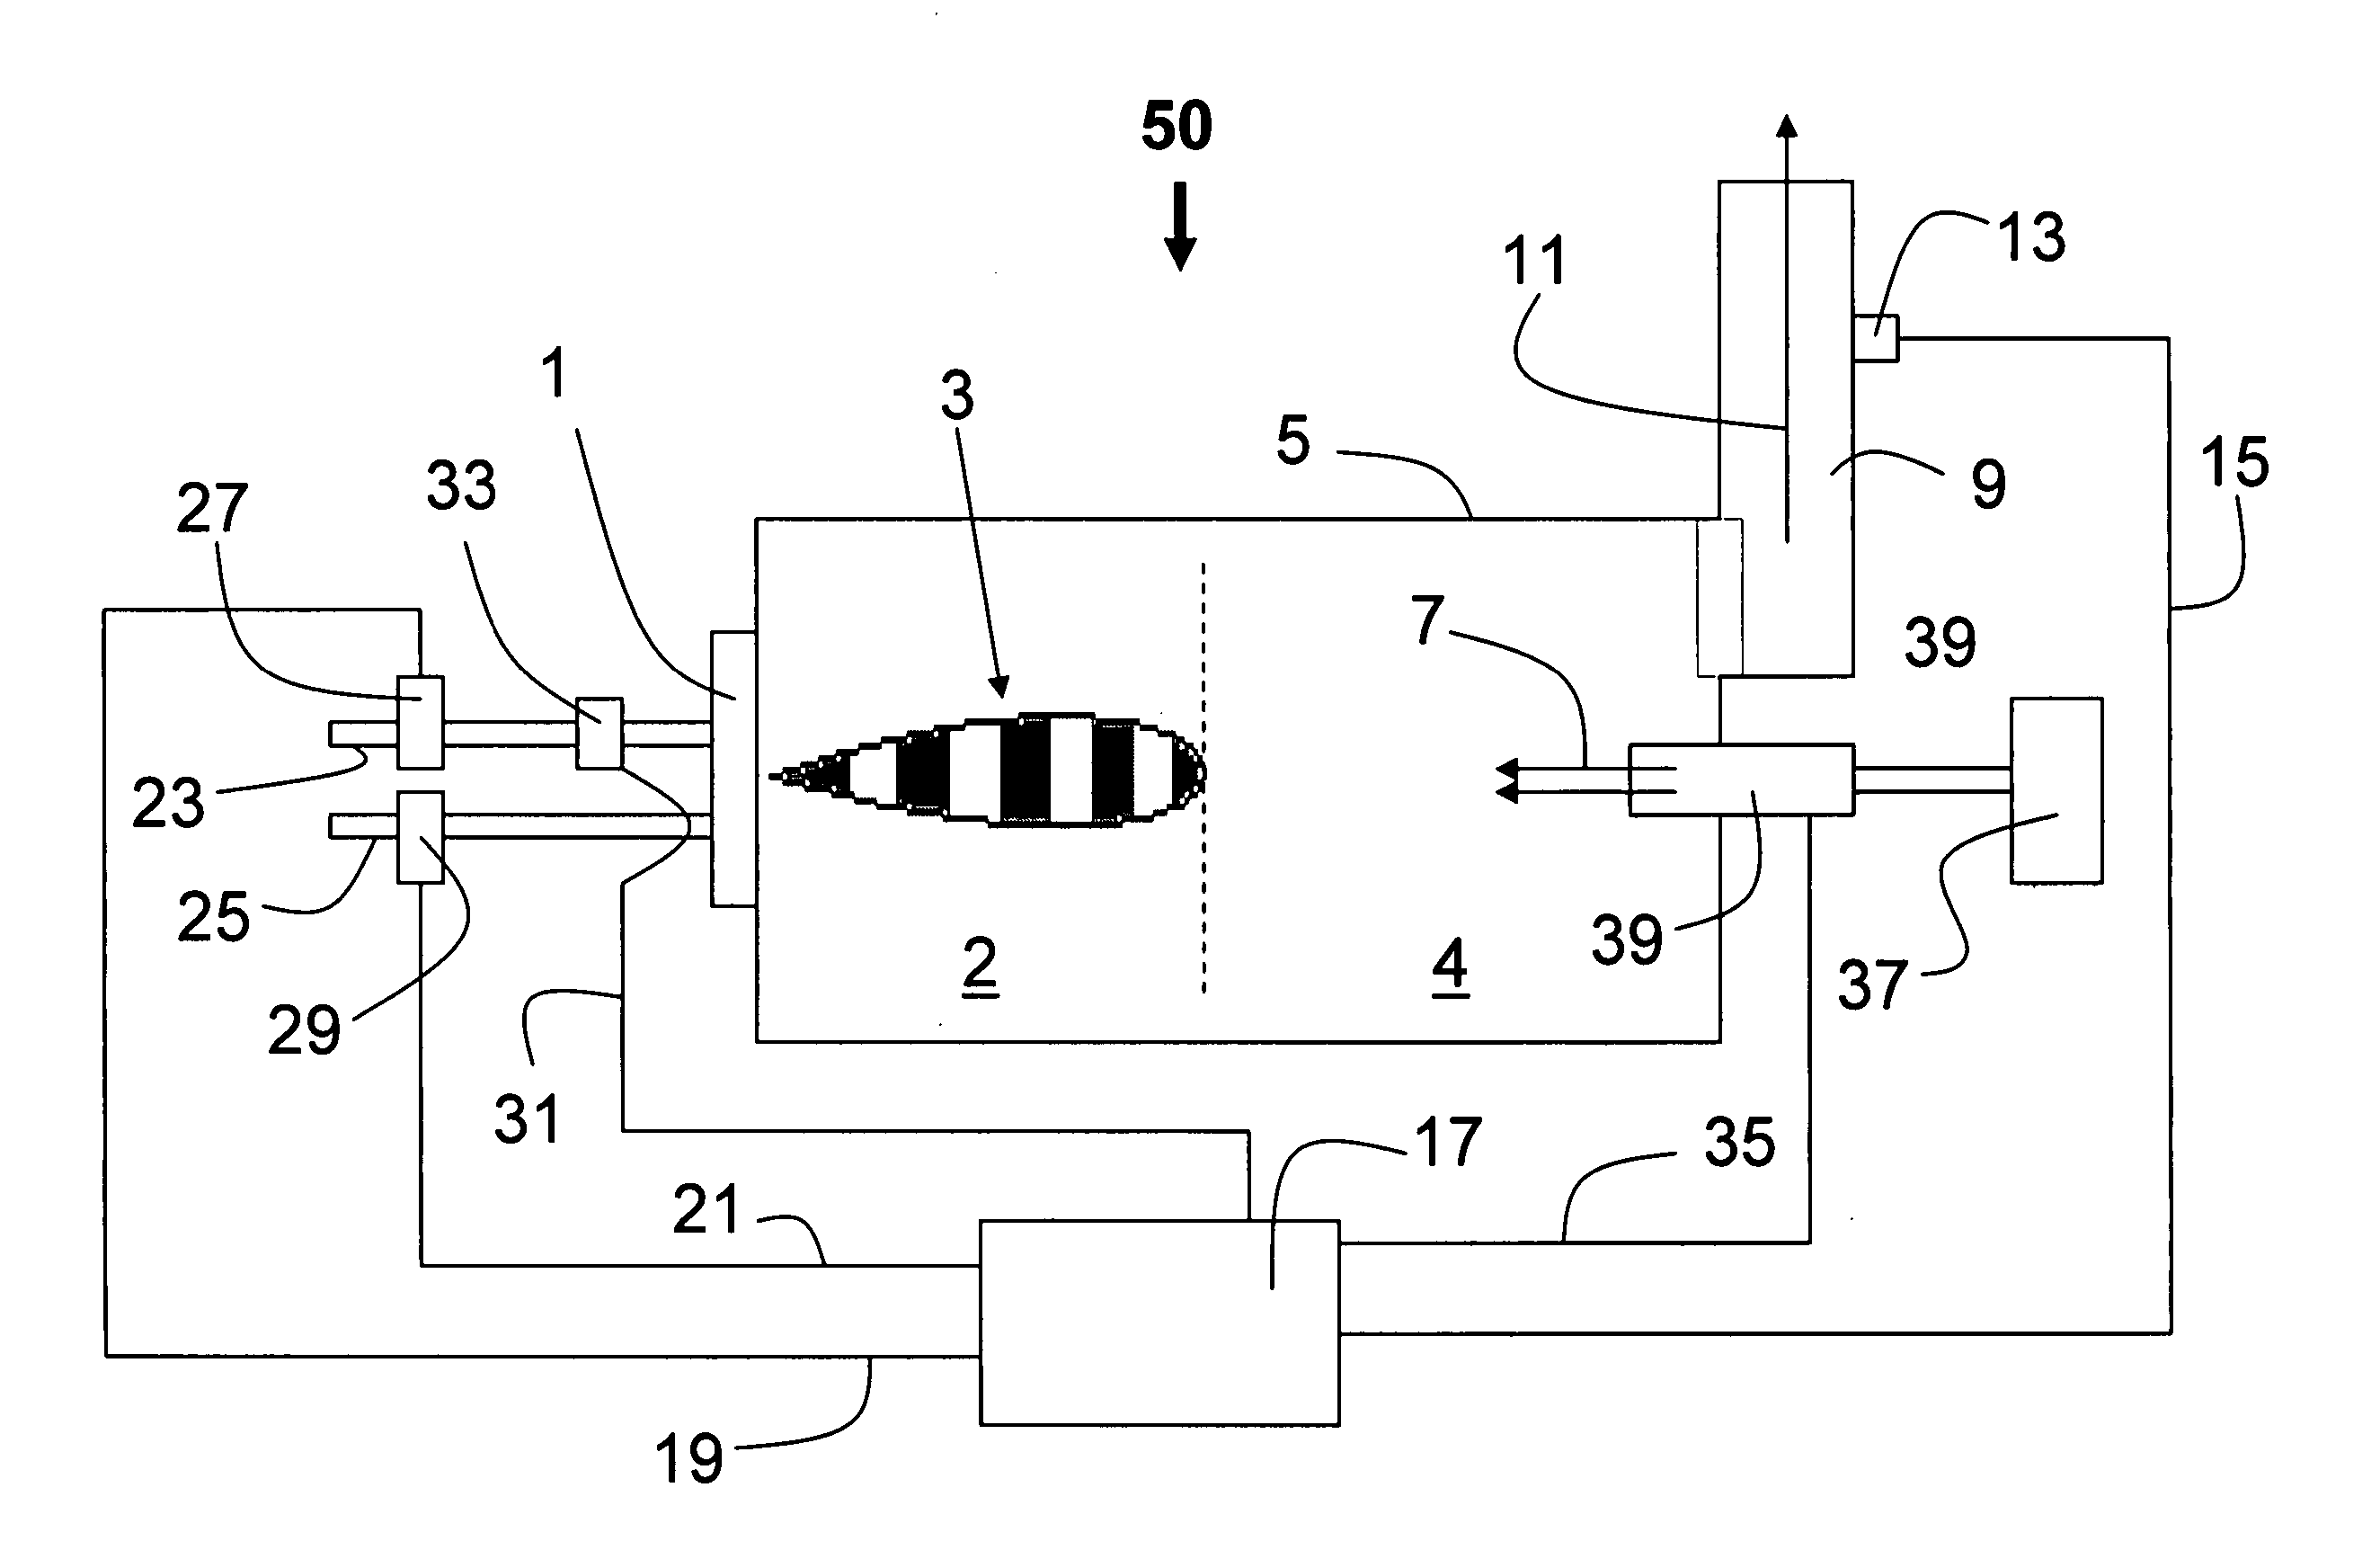 Advanced control system for enhanced operation of oscillating combustion in combustors